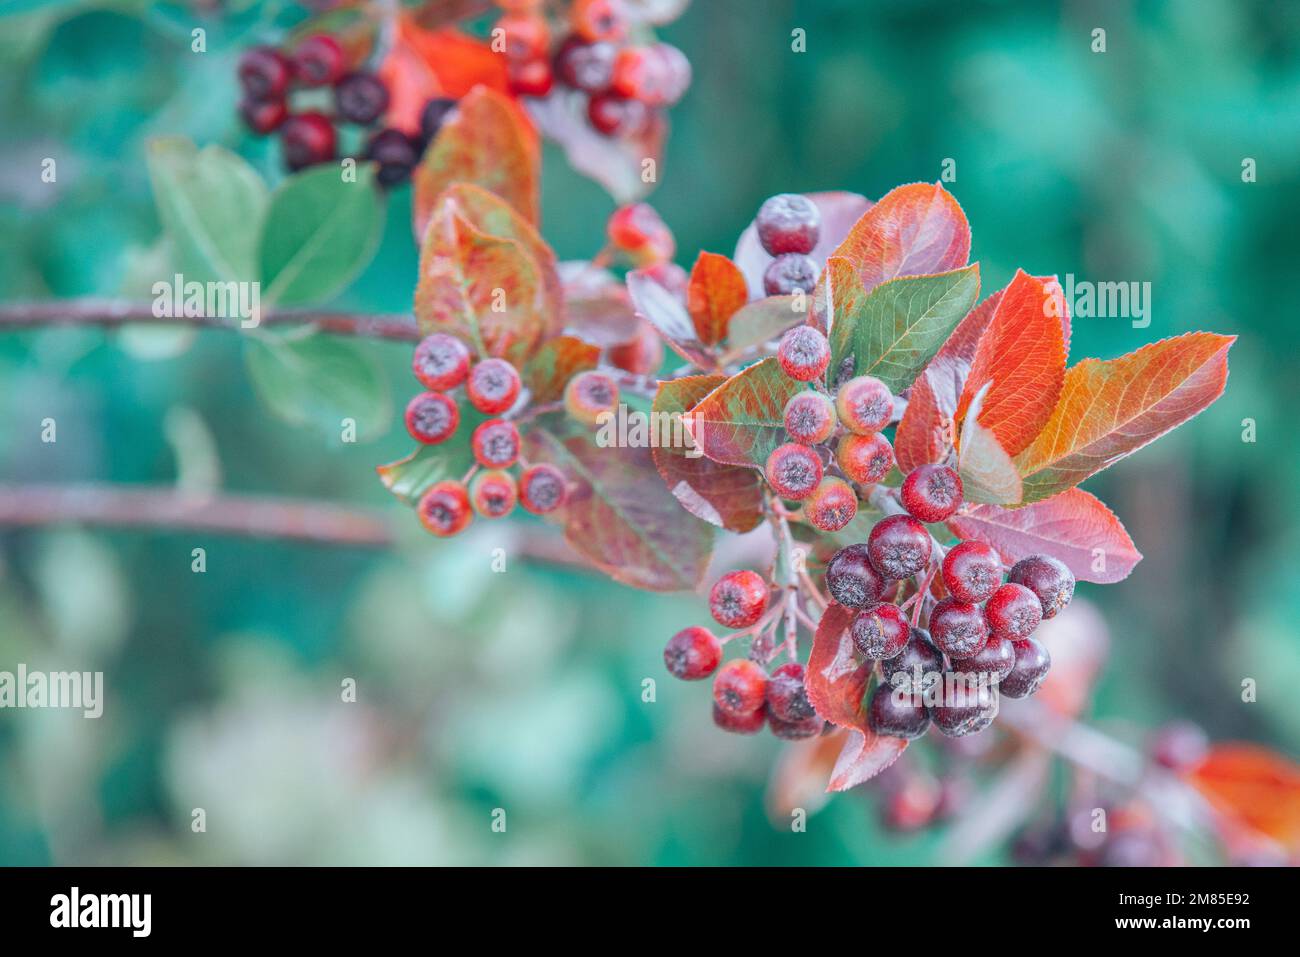 A closeup of Aronia prunifolia growing in a garden under the sunlight with a blurry background Stock Photo